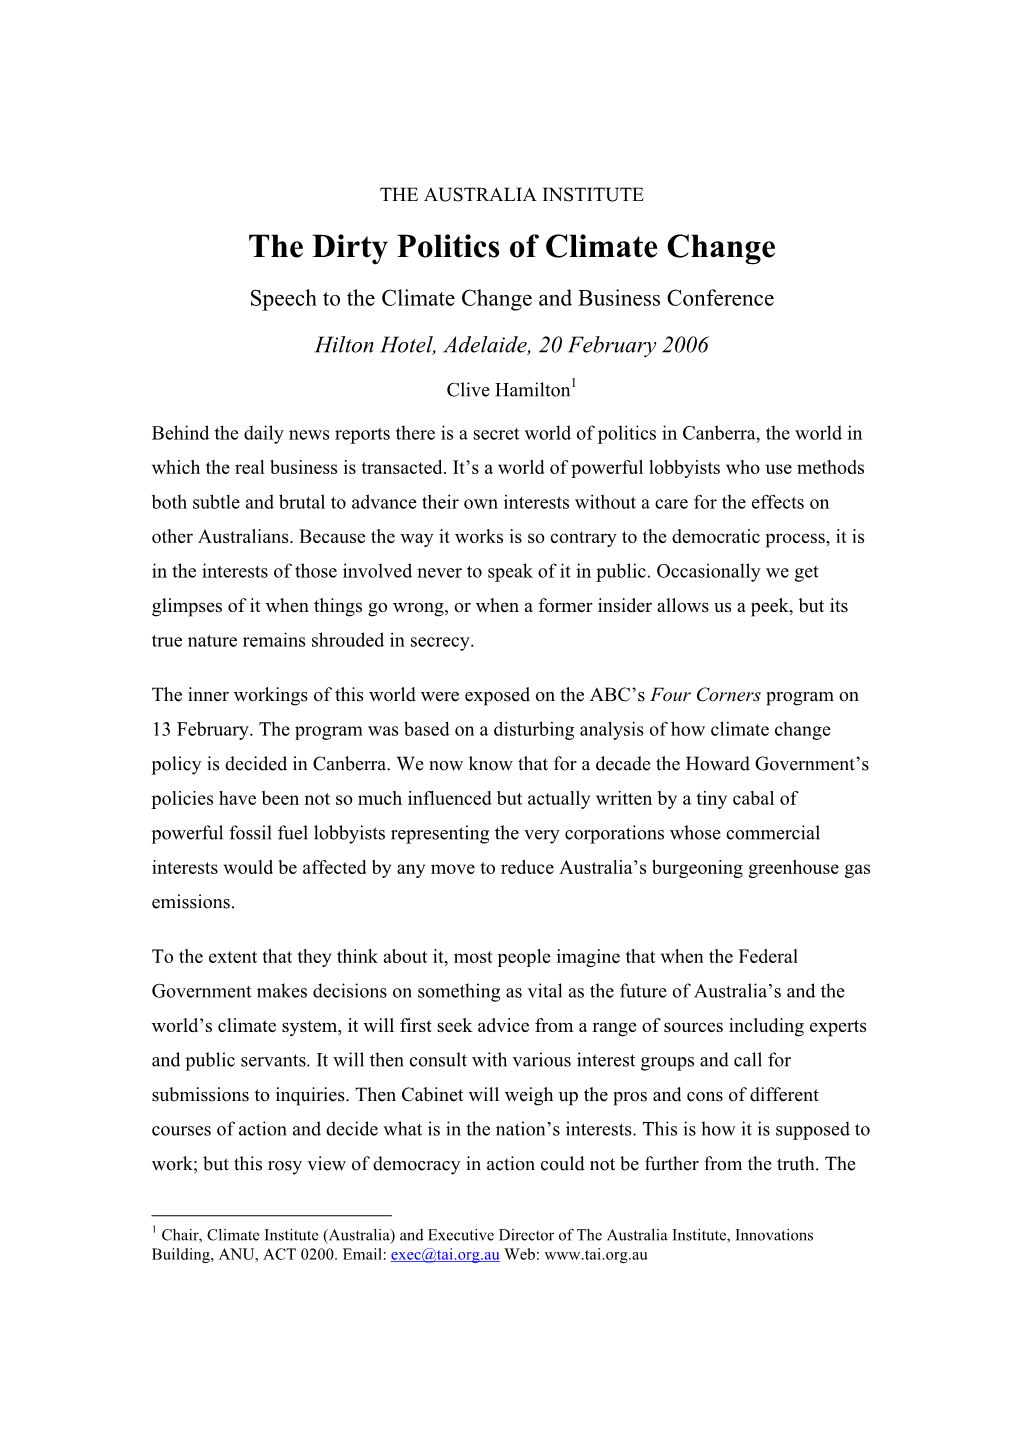 The Dirty Politics of Climate Change Speech to the Climate Change and Business Conference Hilton Hotel, Adelaide, 20 February 2006